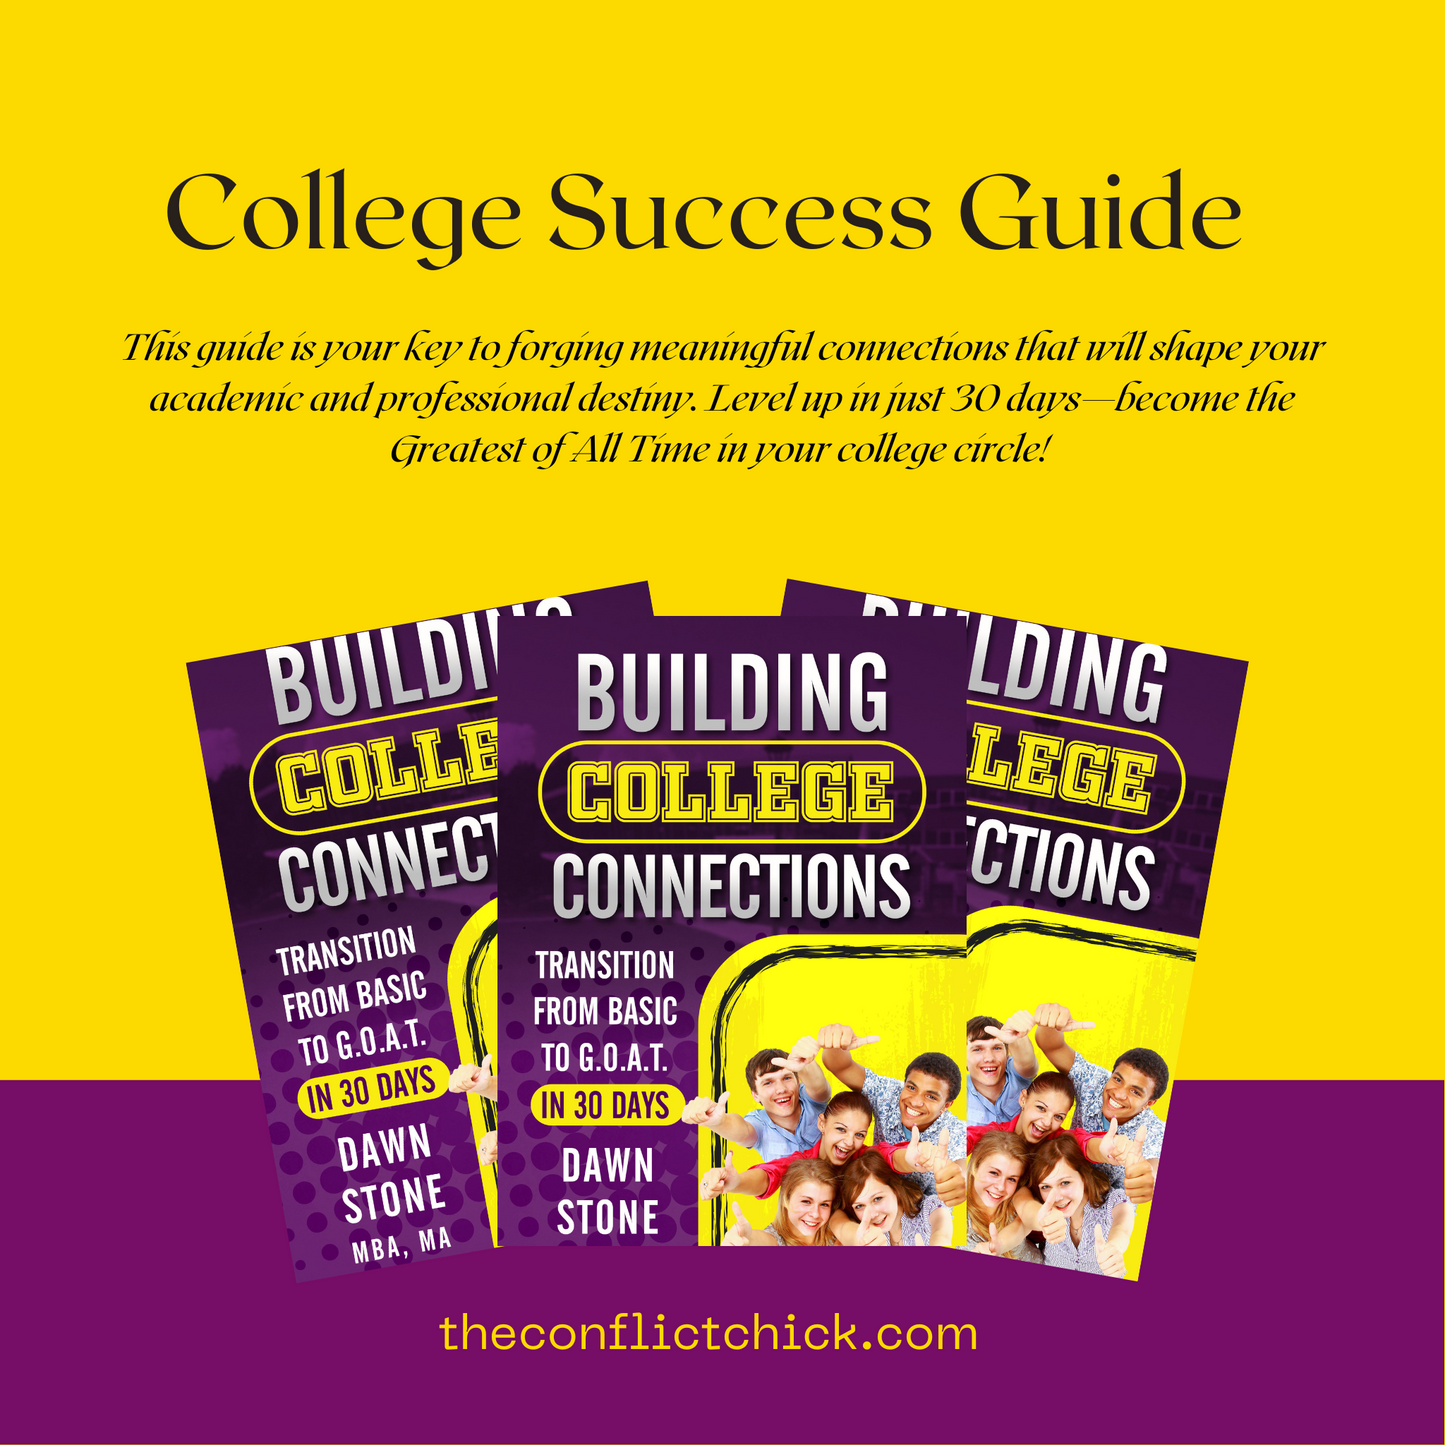 Building College Connection - Transition from Basic to G.O.A.T. In 30 Days.